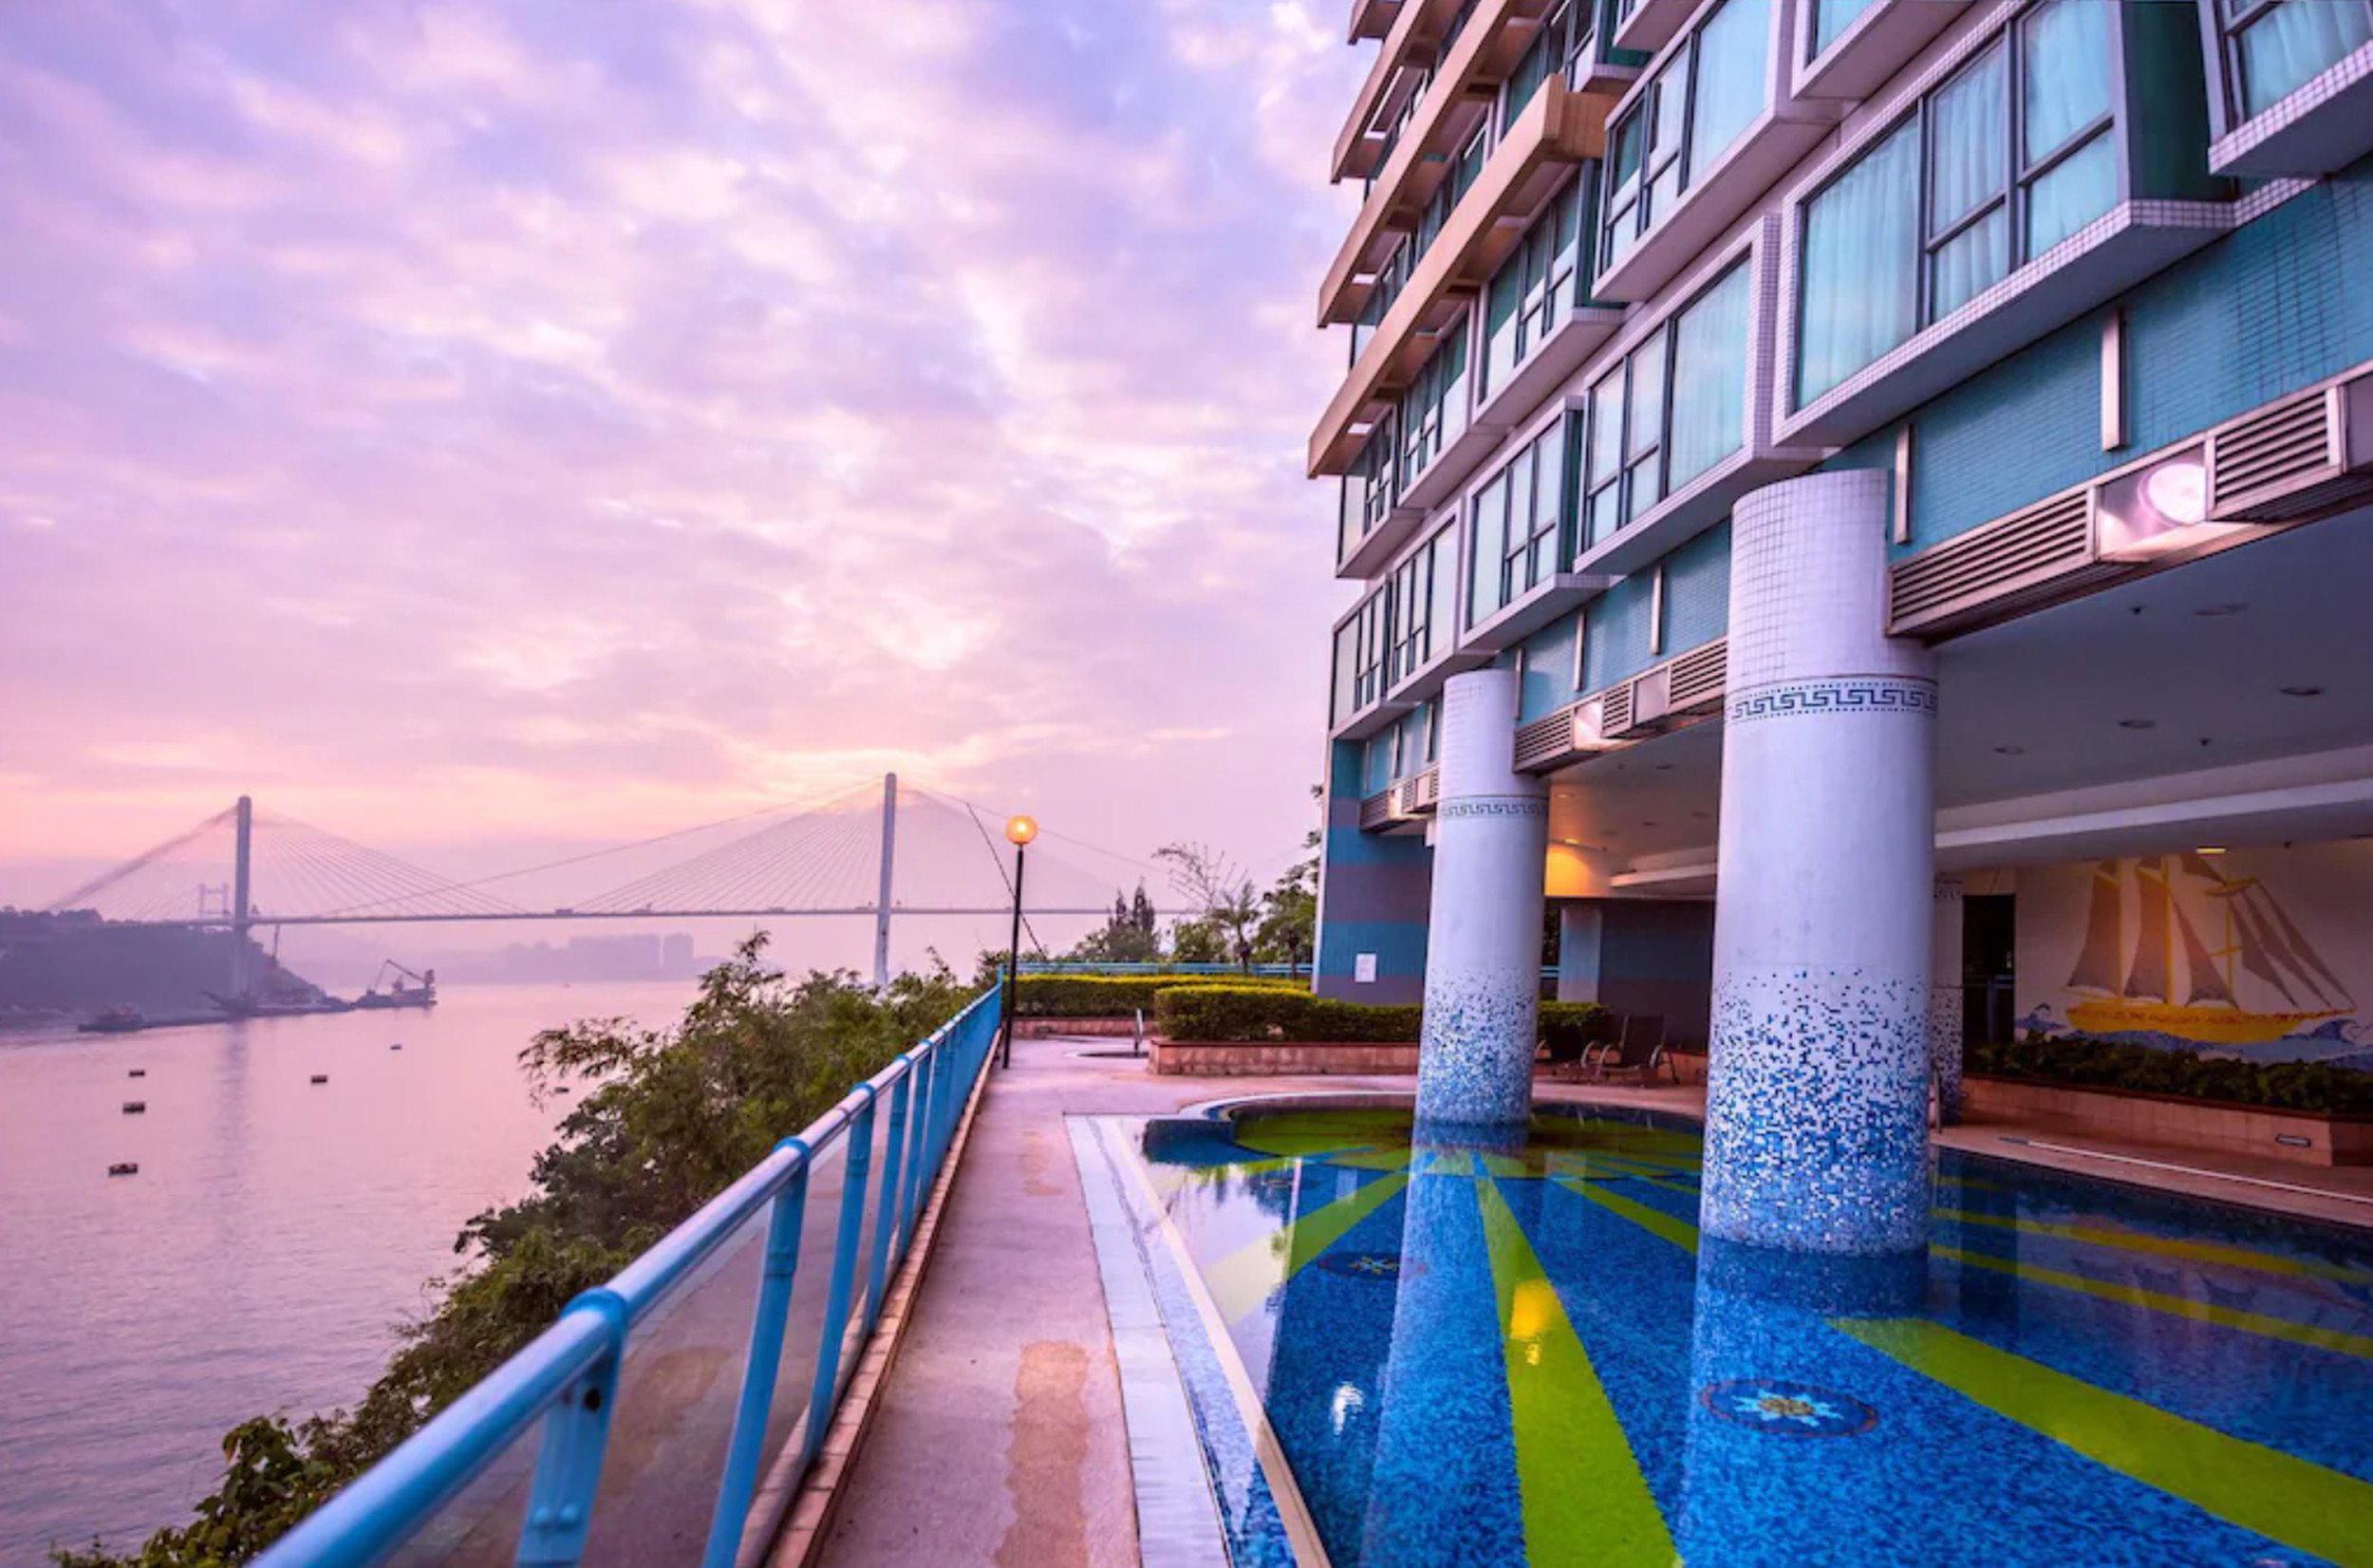 Magnificent’s latest acquisition was the Bay Bridge Lifestyle Retreat, a 435-room waterfront hotel in the western New Territories. Photo: SCMP Handout